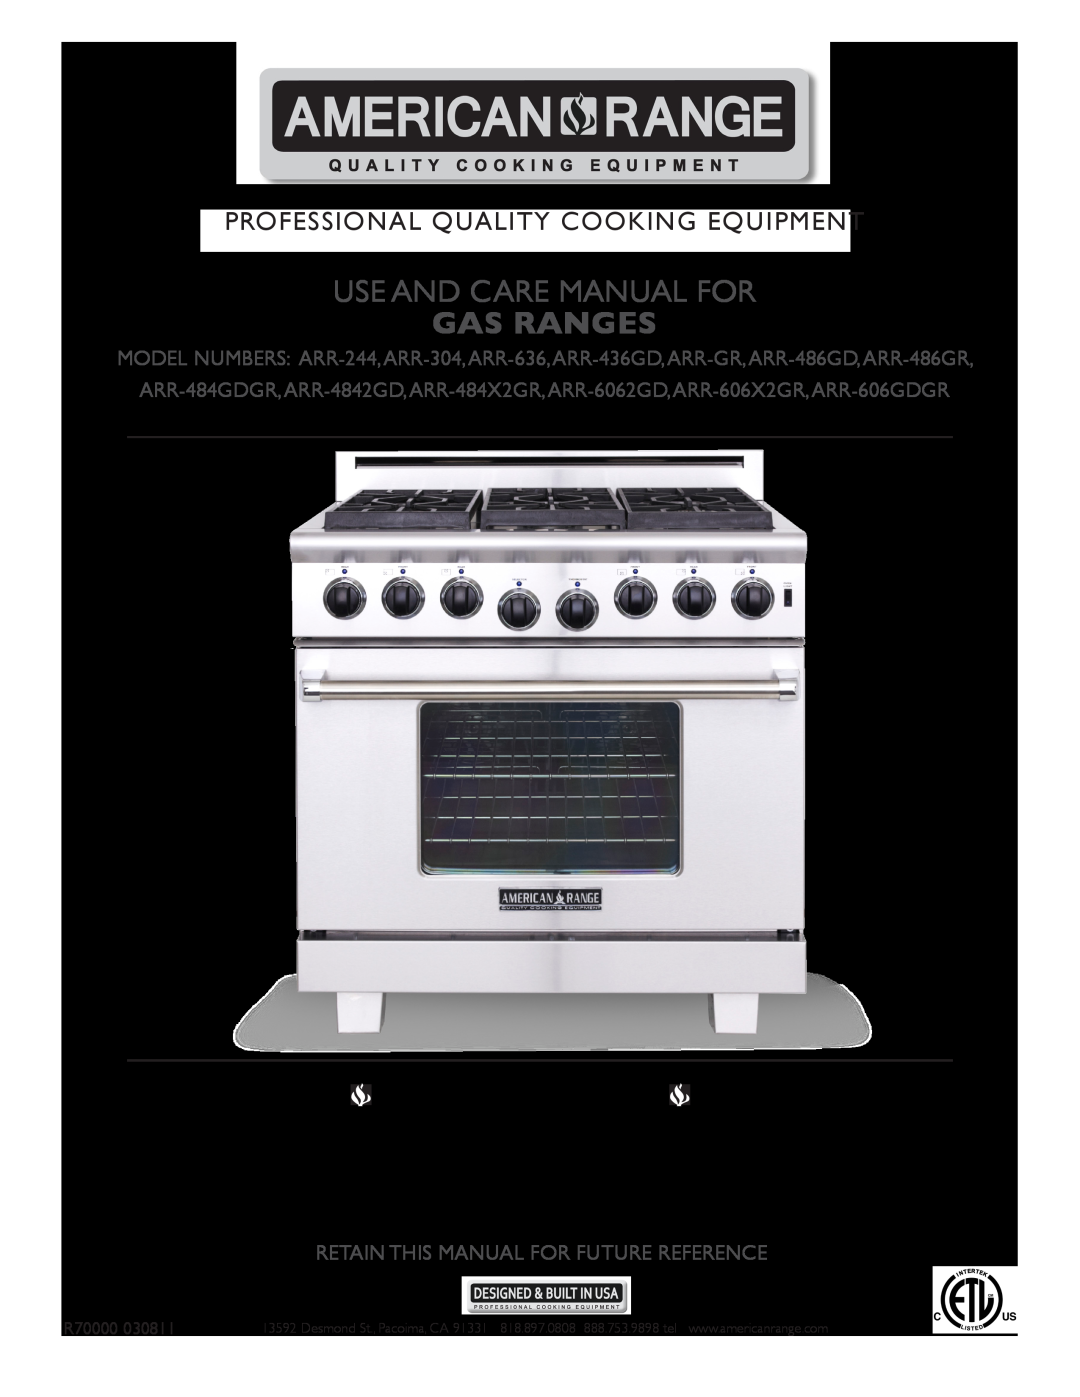 GE ARR-486GD, ARR-6062GD, ARR-GR manual Use And Care Manual For, Gas Ranges, Professional Quality Cooking Equipment, R70000 